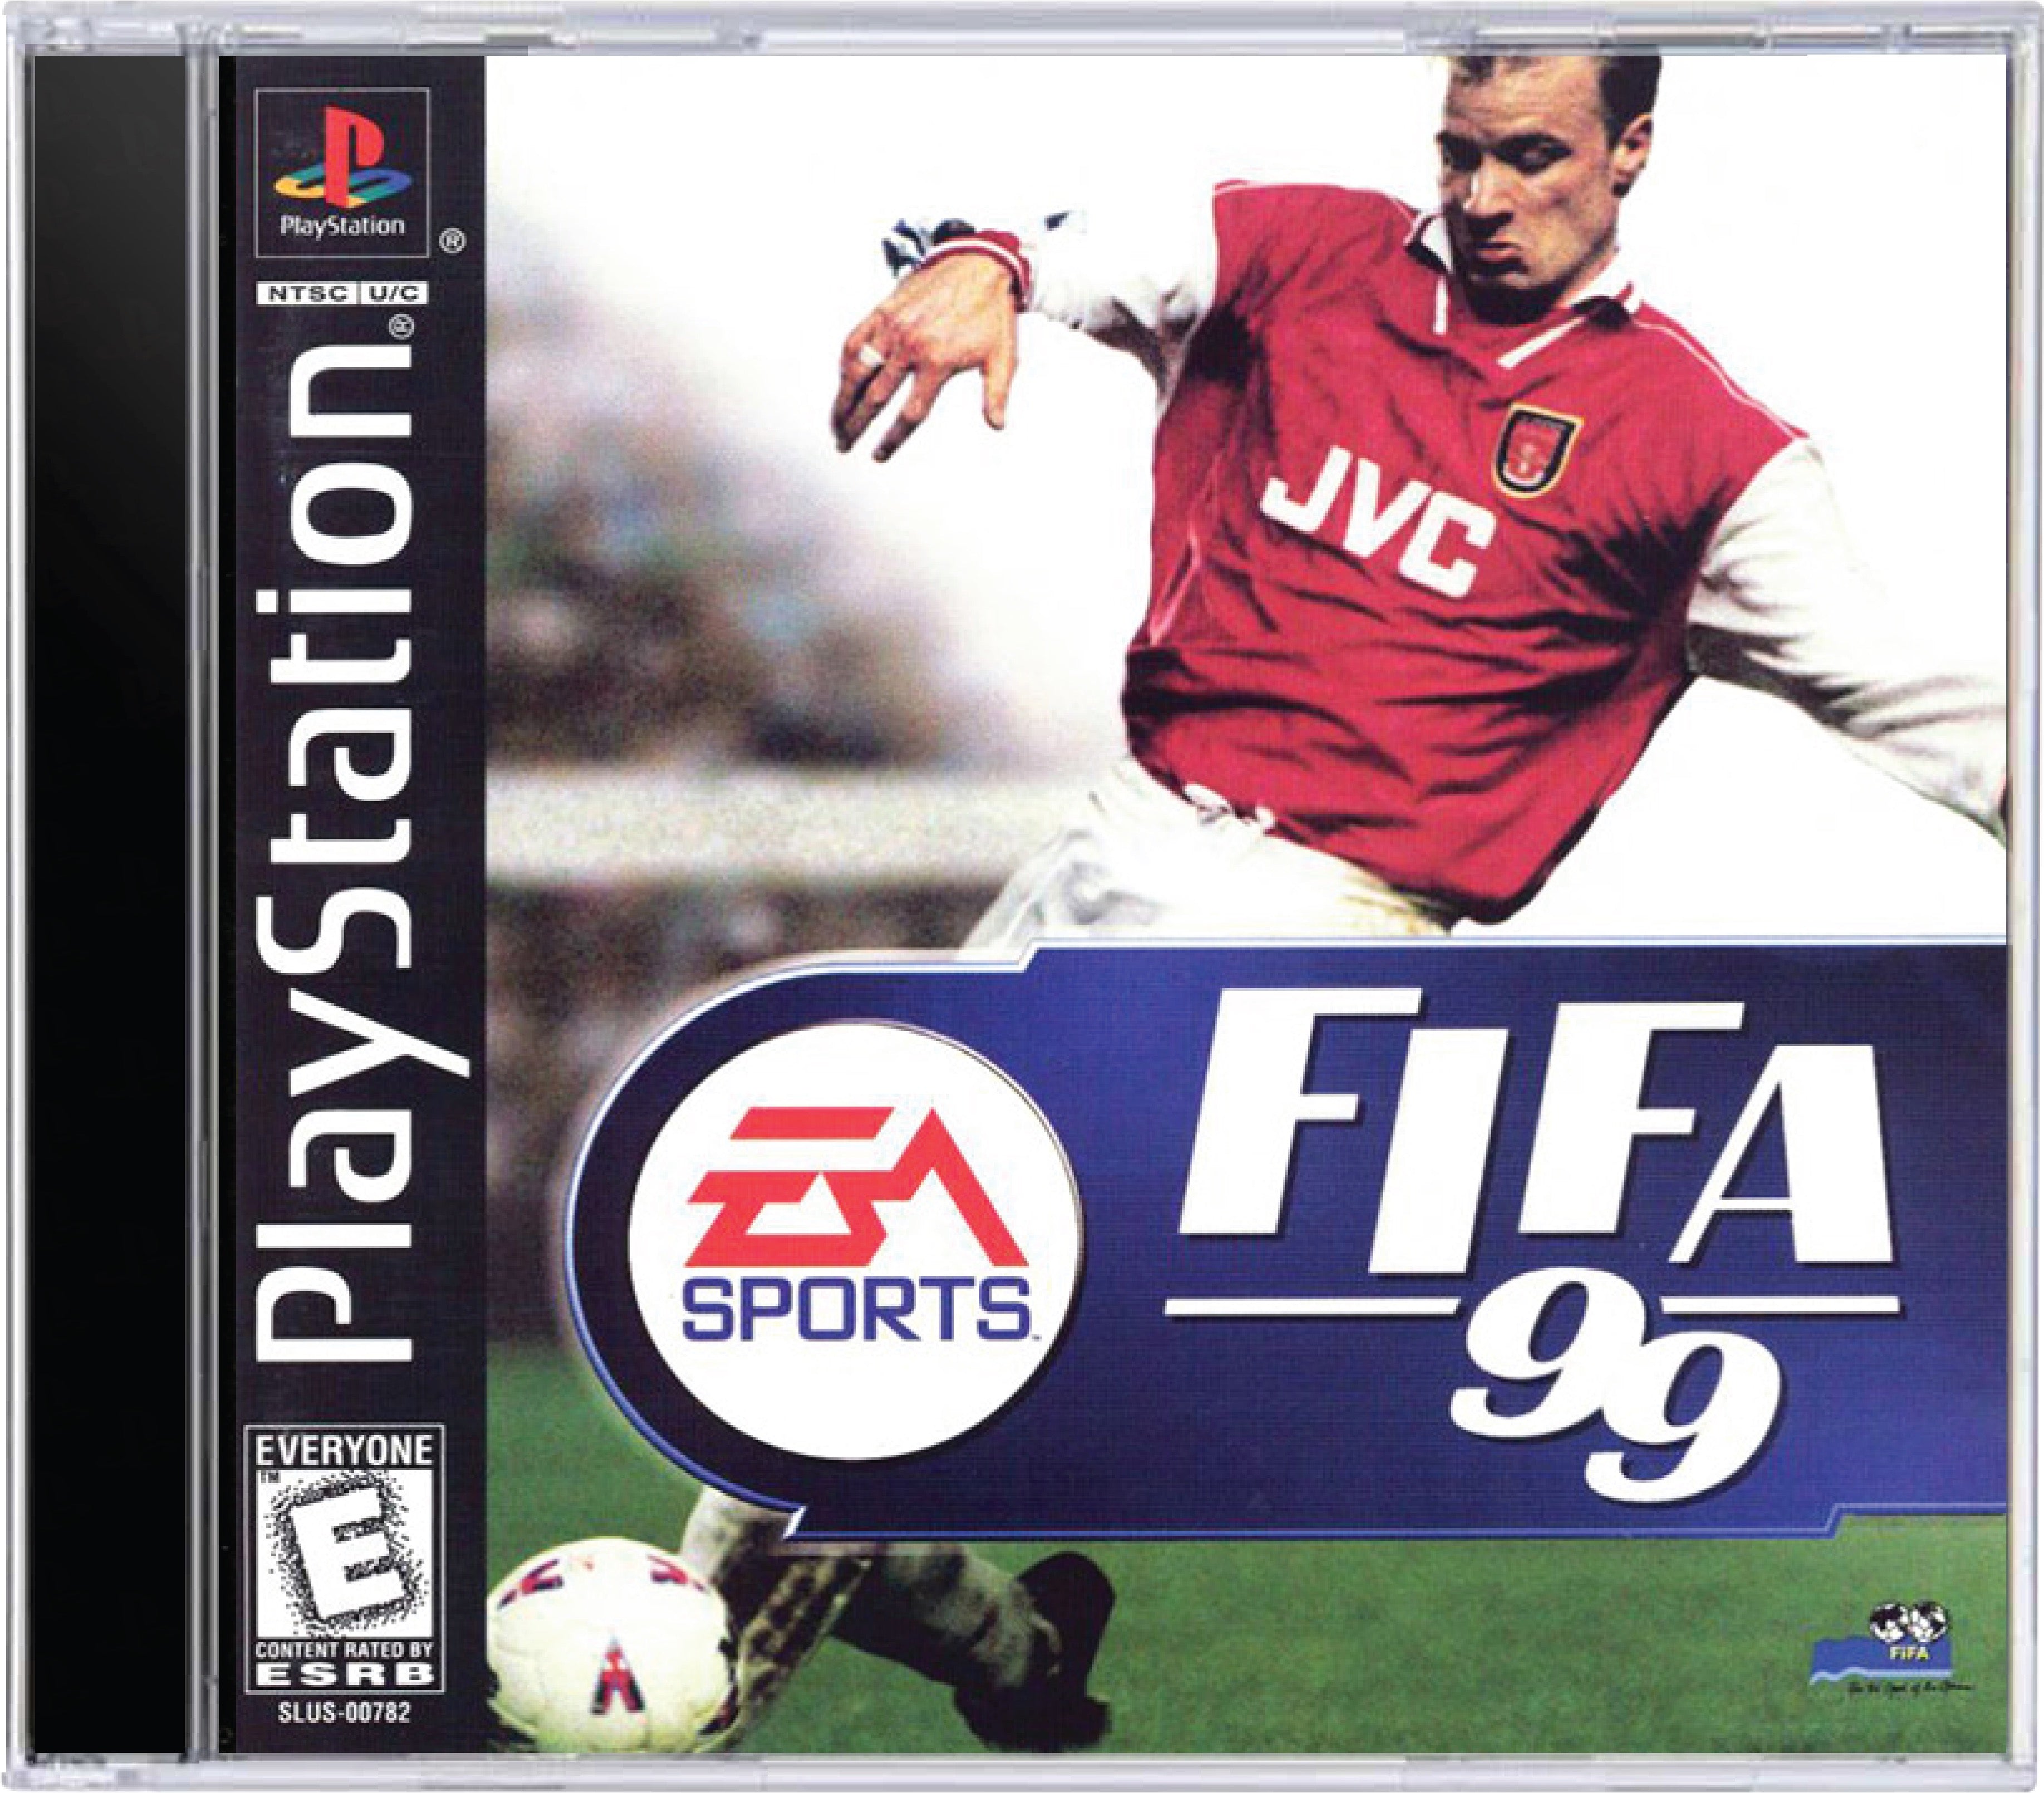 FIFA 99 Cover Art and Product Photo